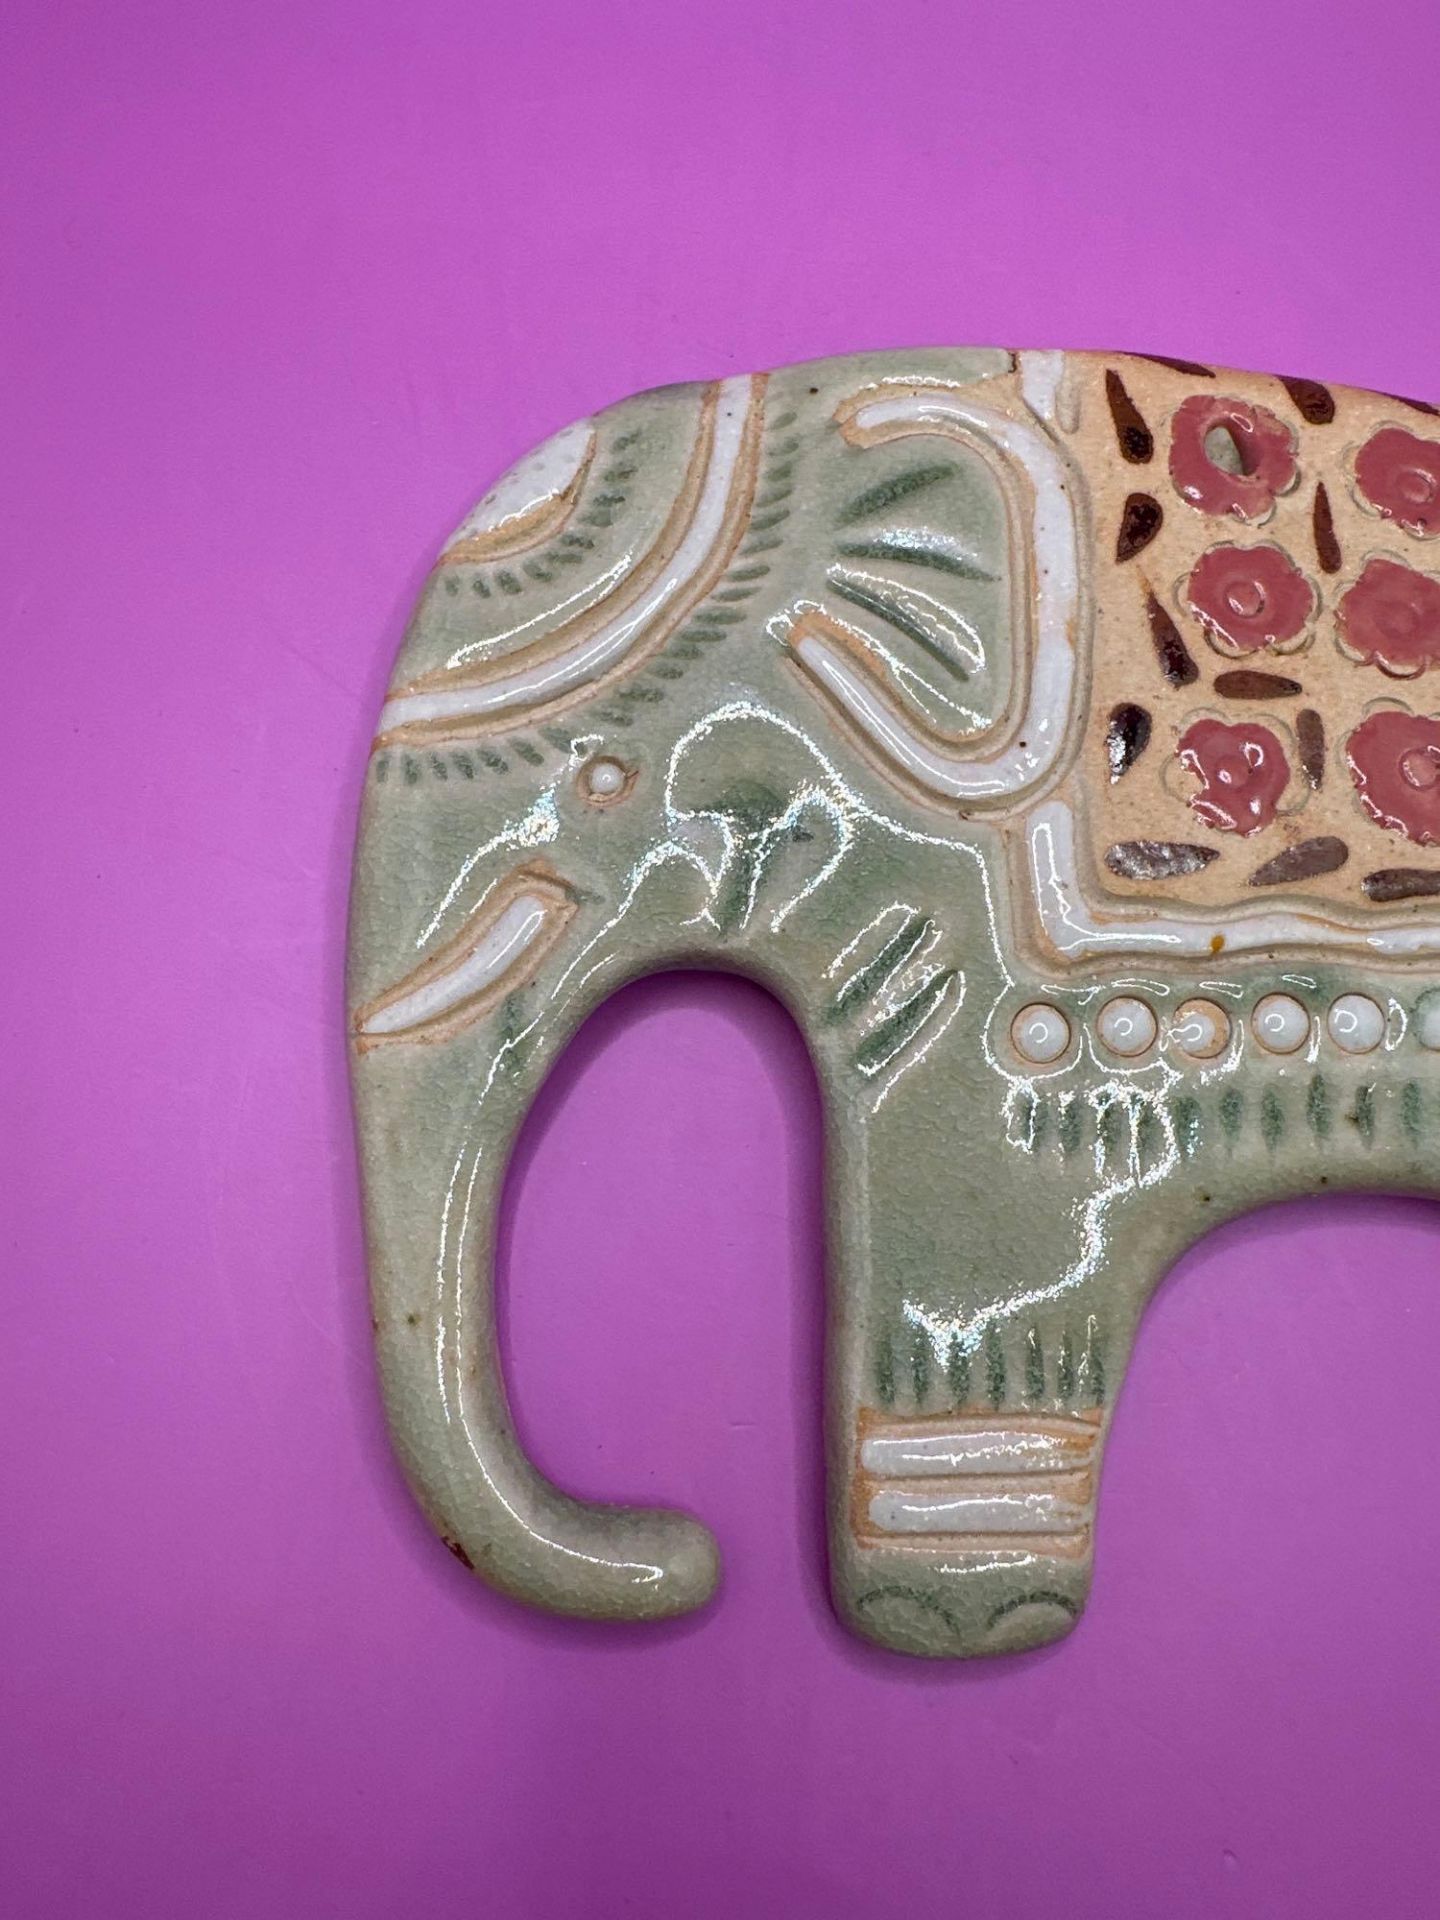 Wall Hanging Ceramic Elephant (Made In Thailand) - Image 2 of 6